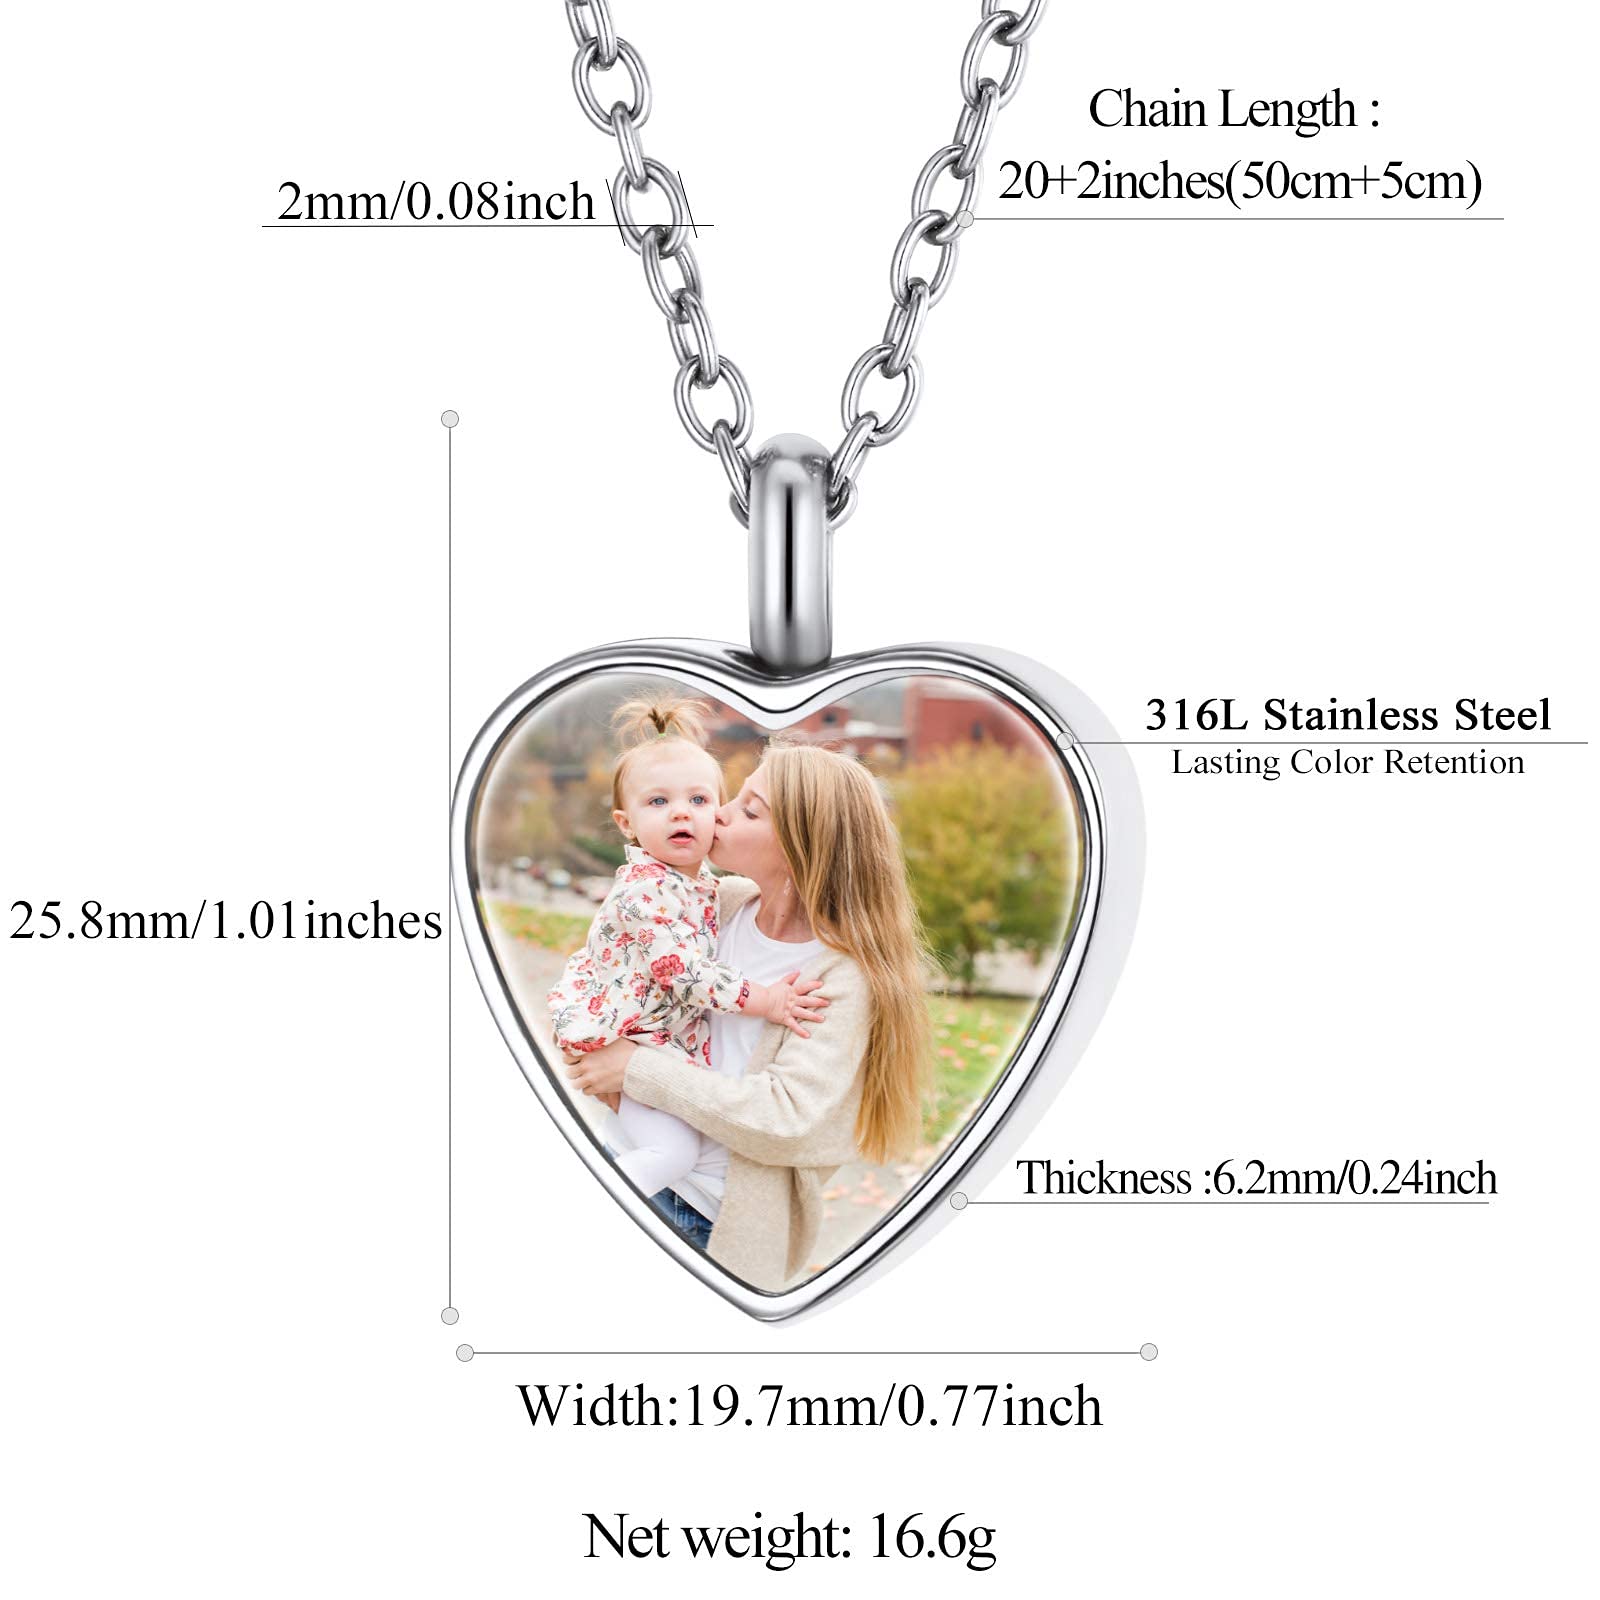 FindChic Customized Heart Shaped Urn Necklaces for Ashes with Custom Picture/Birthstone Stainless Steel/18K Gold Plated Claddagh/Angel Wing Pendant Waterproof Keepsake Cremation Jewelry, with Gift Box